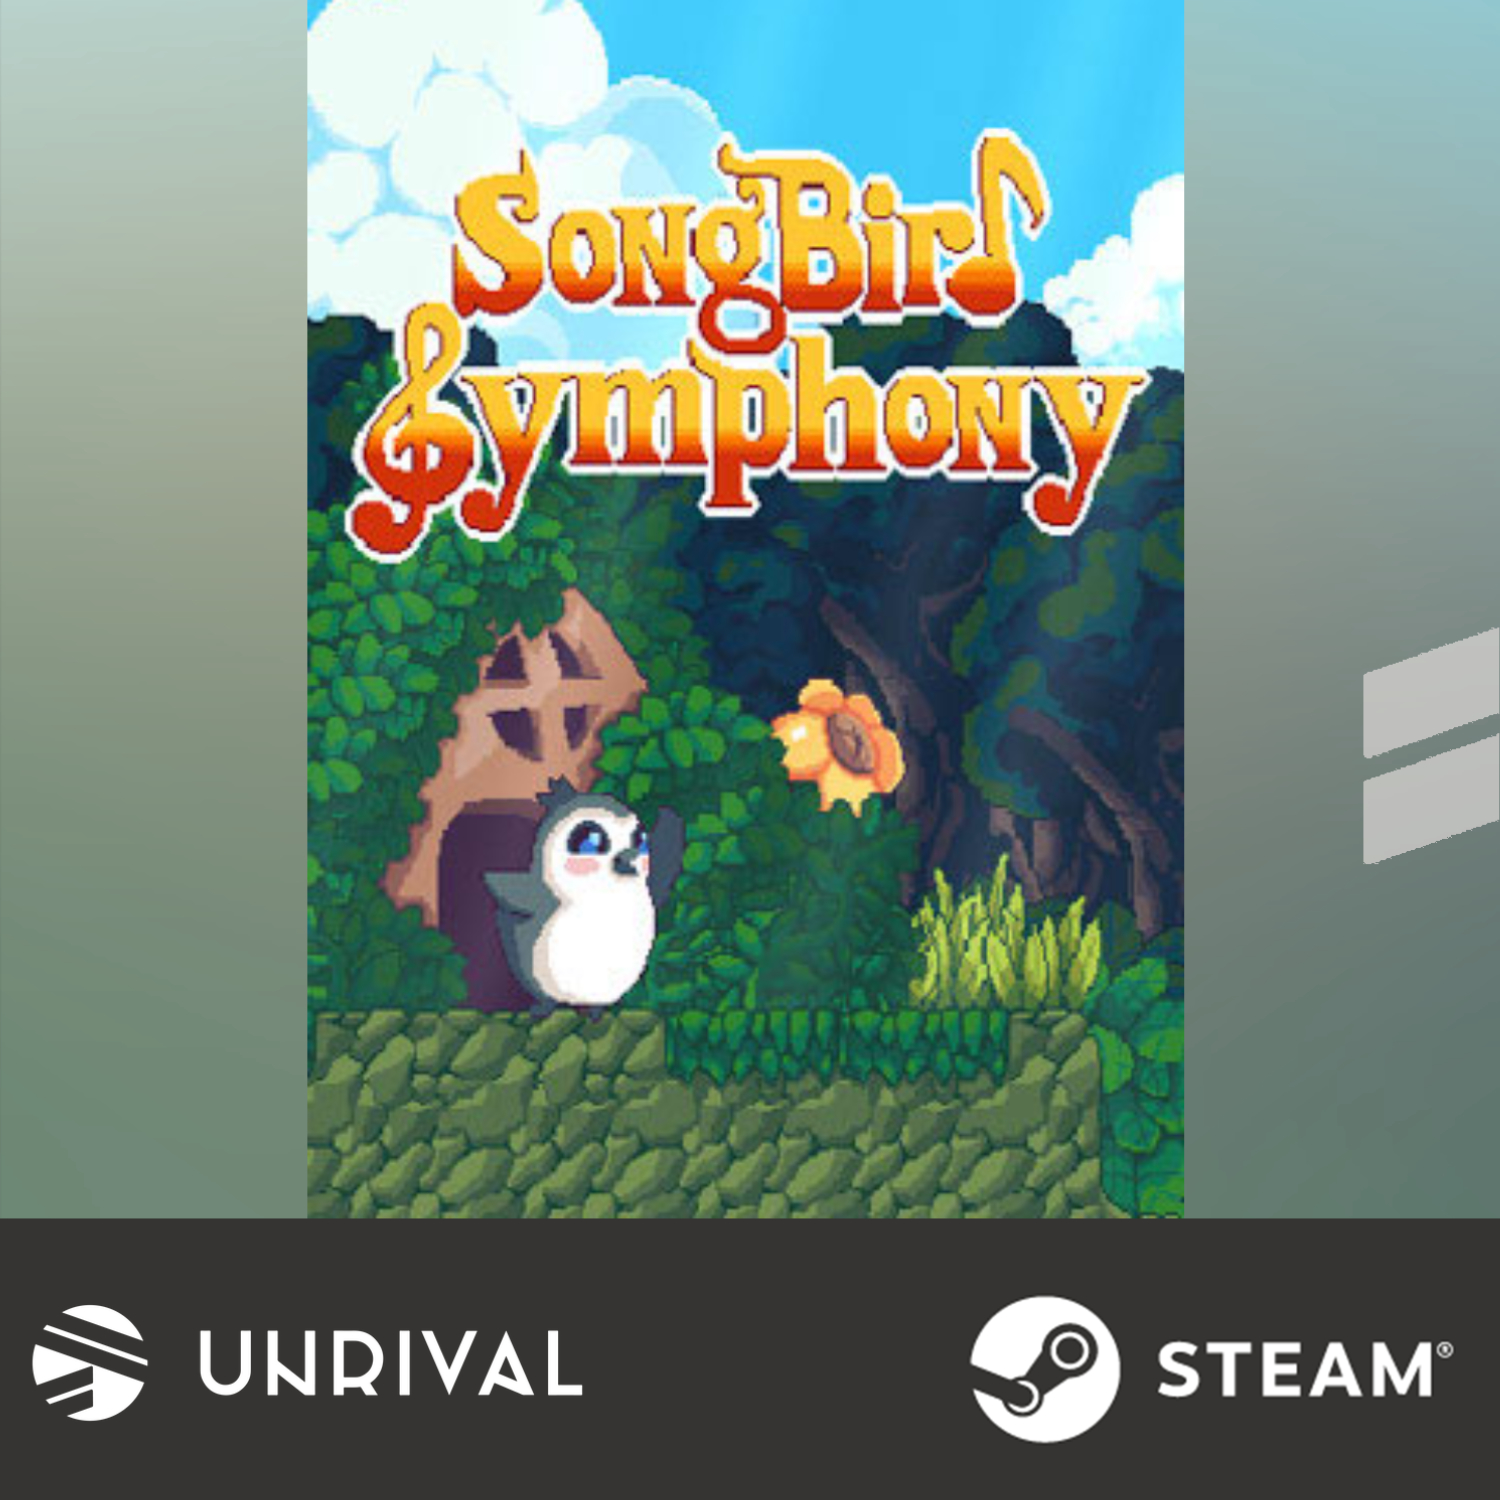 Songbird Symphony PC Digital Download Game (Single Player) - Unrival